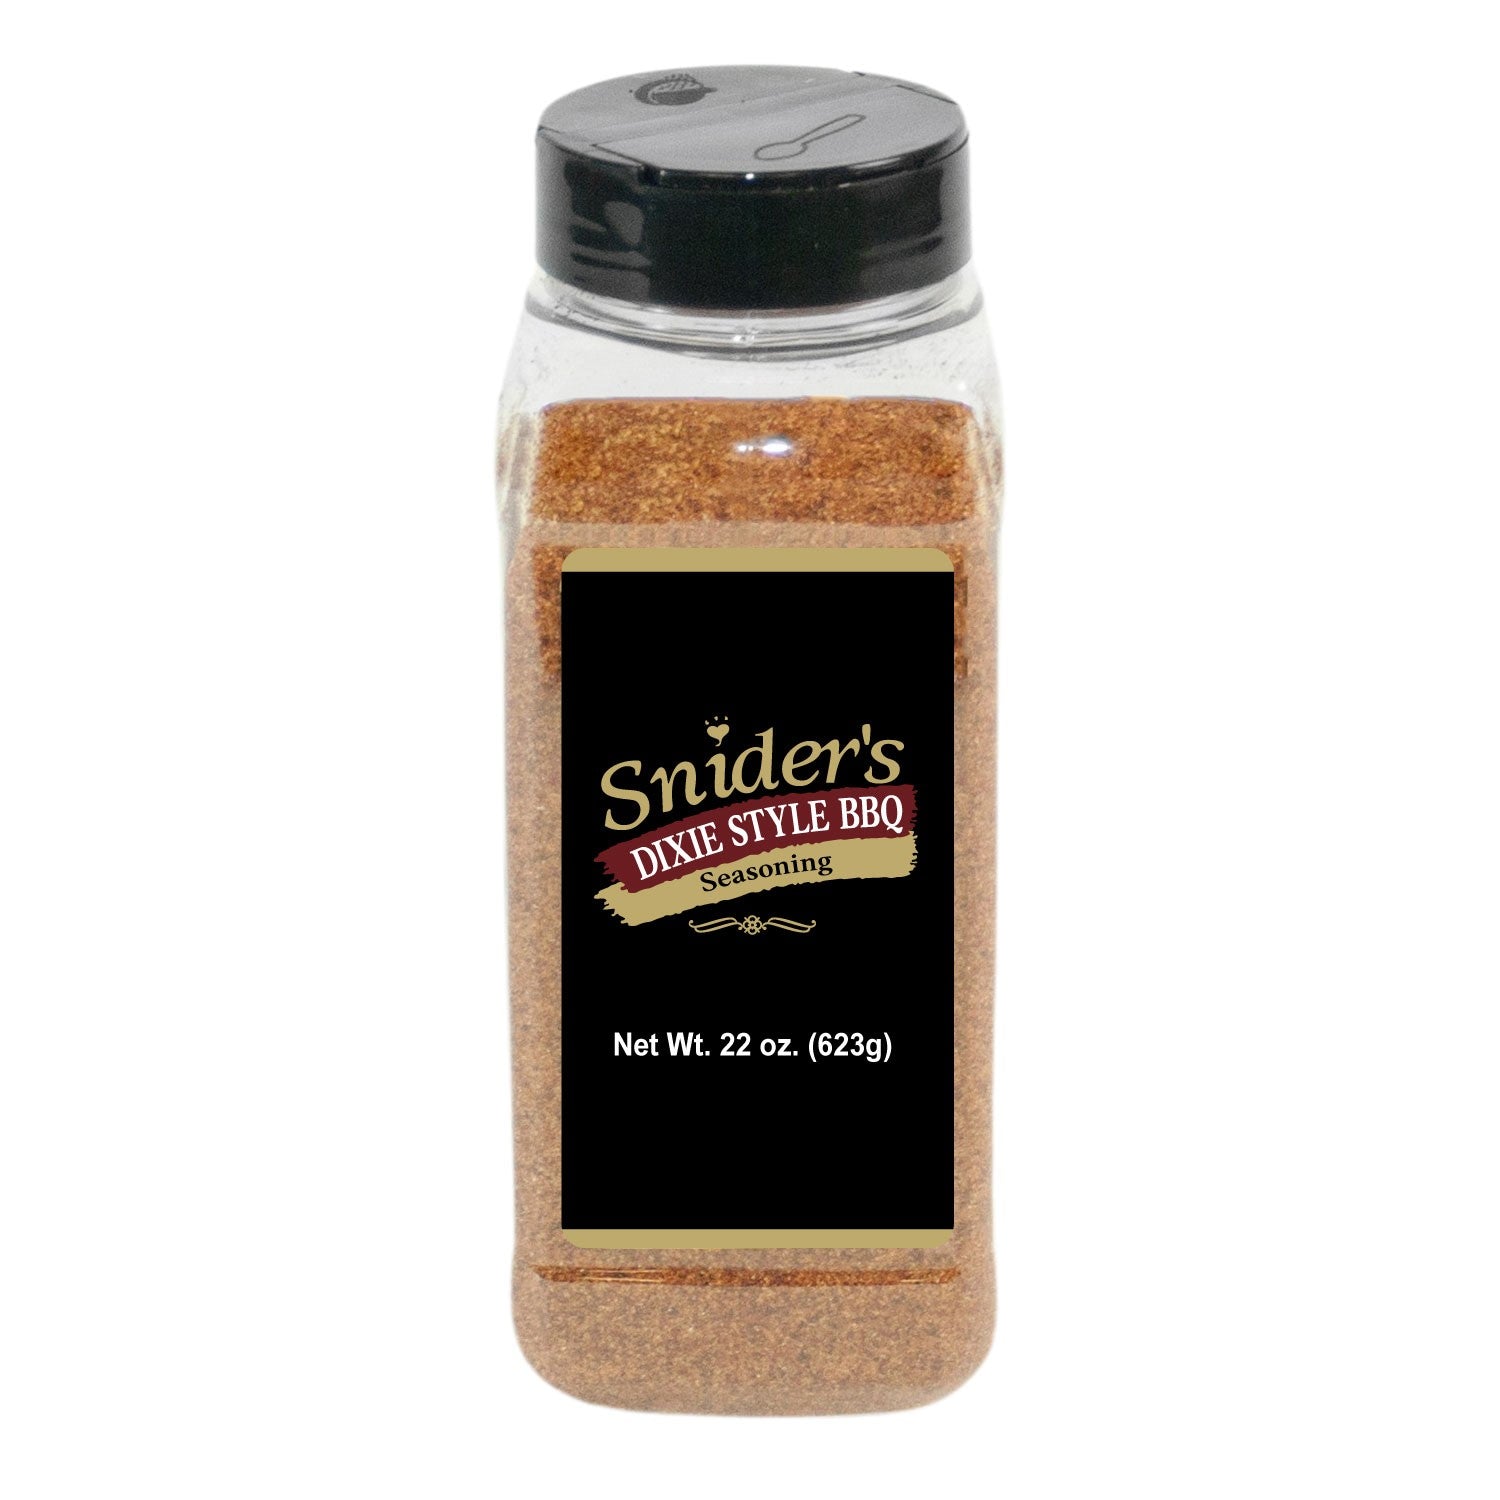 Snider's Dixie Style BBQ Spice, 6 - 22 oz. Shakers per Case